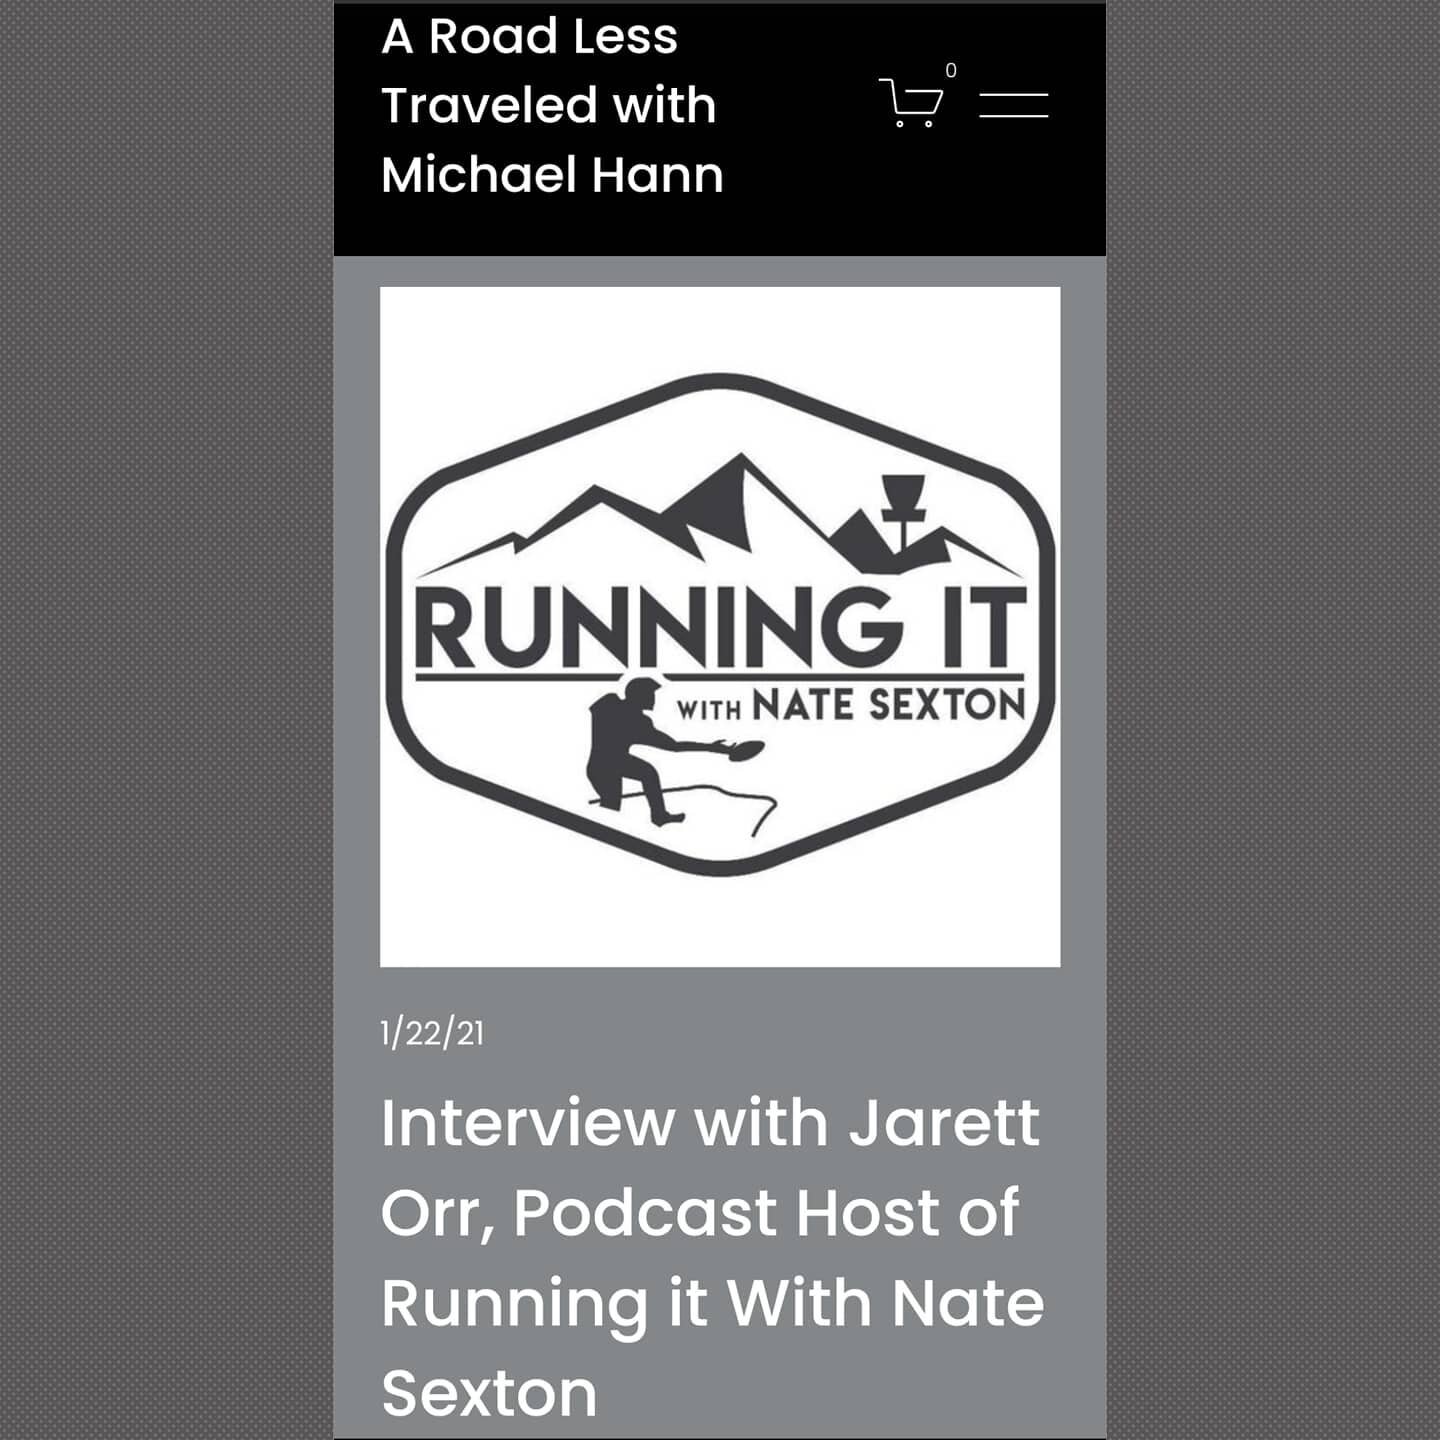 WNY is lucky enough to be home to Jarett Orr, co-host of the podcast Running it With Nate Sexton. 

I was lucky enough to get to talk to him and learn about how he got into disc golf and a his podcasting history! 

Jarett and Nate make a great podcas